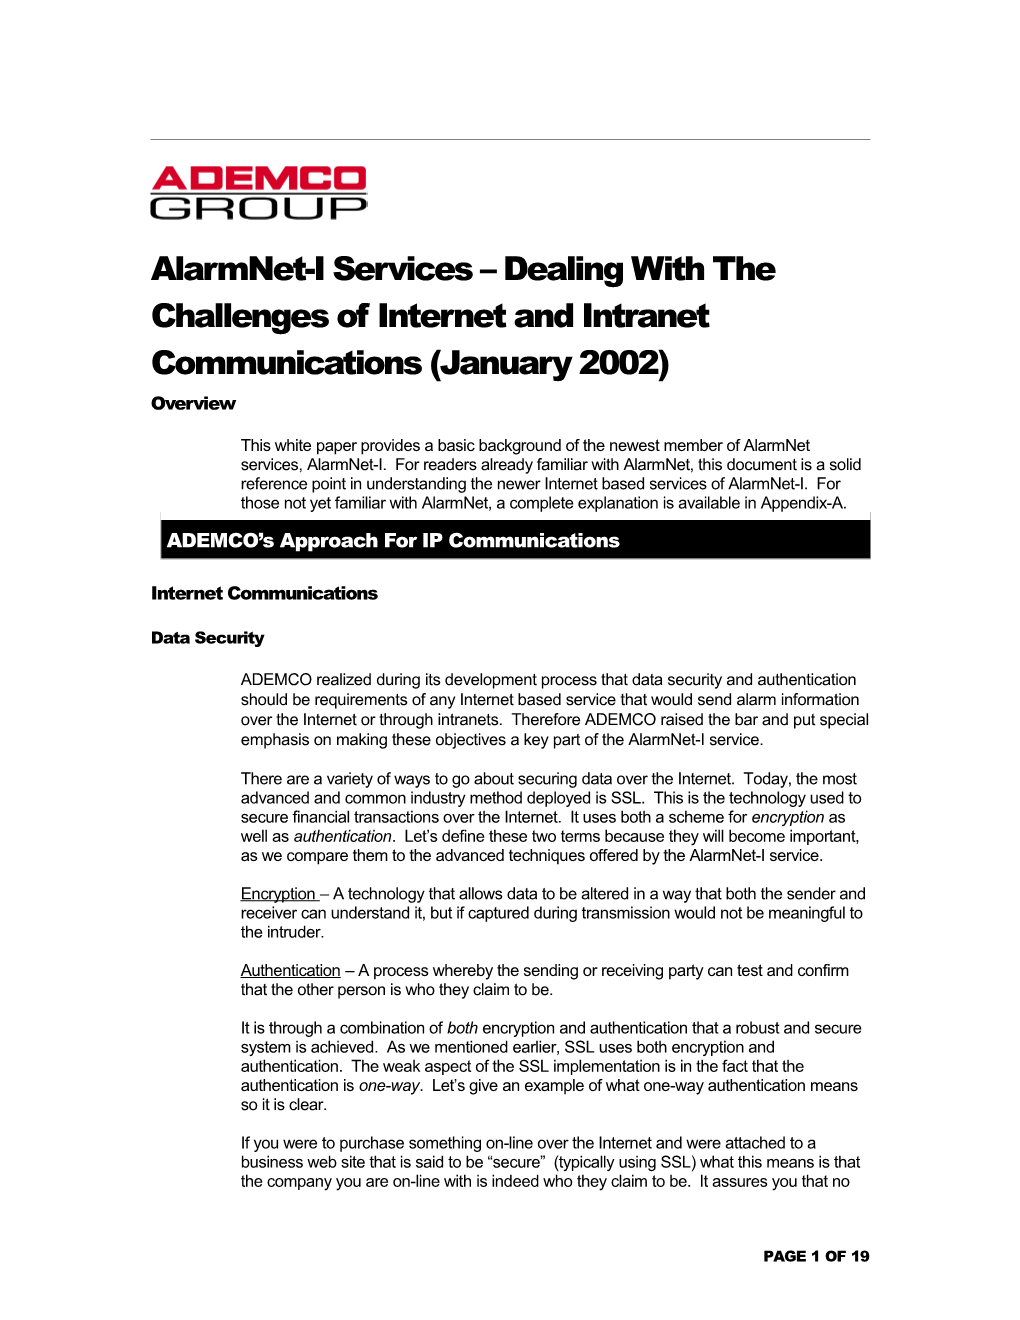 Use of Alarmnet Services for Enhanced Internet Alarm Communications & the ADEMCO Symphony